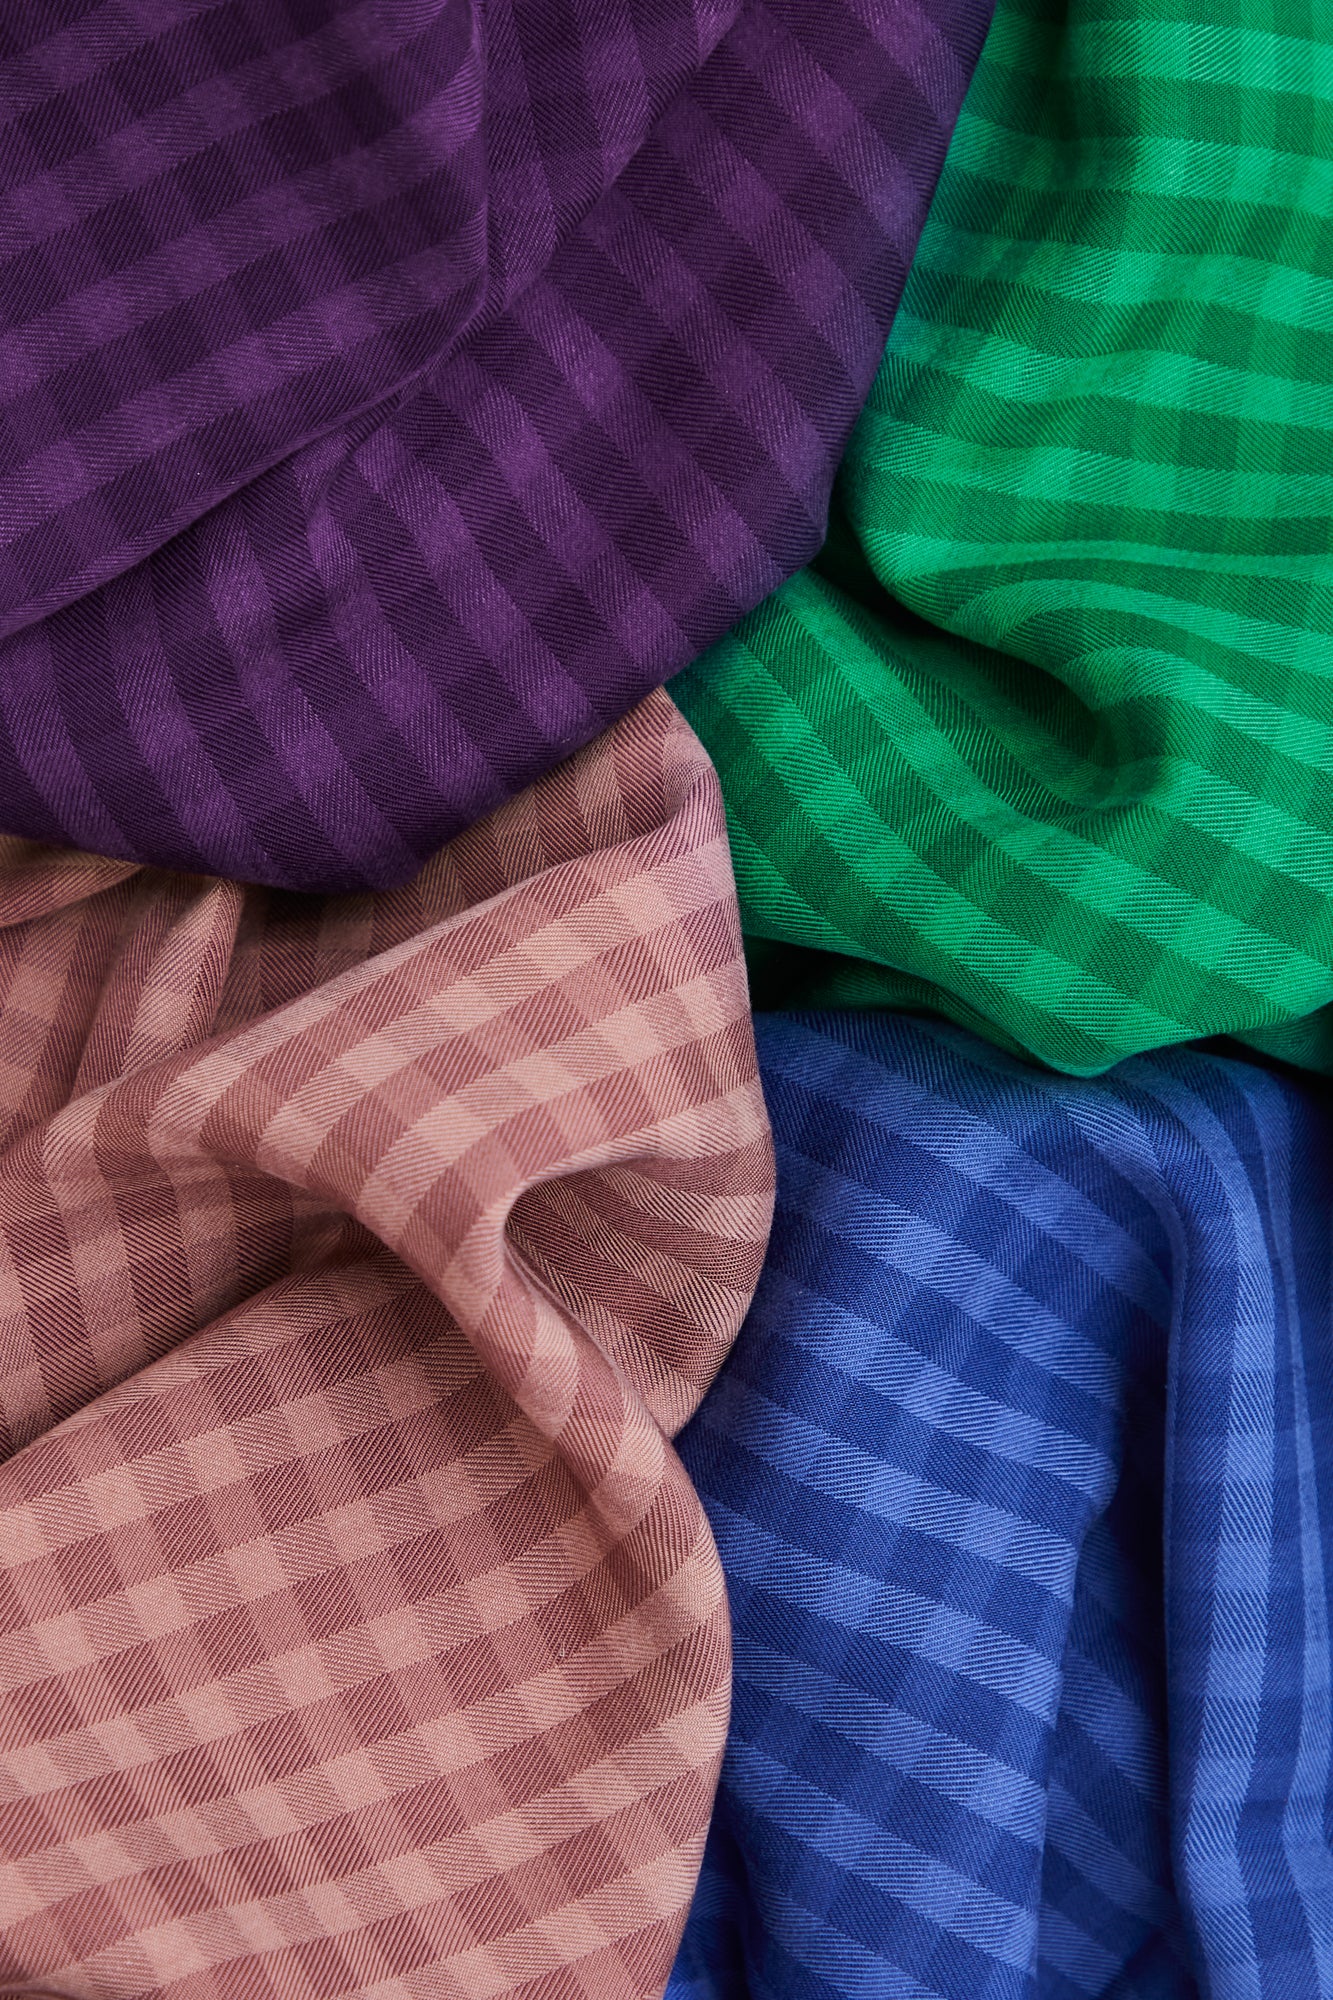 Meet MILK - Frog Two Tone Check with TENCEL™ Lyocell fibres